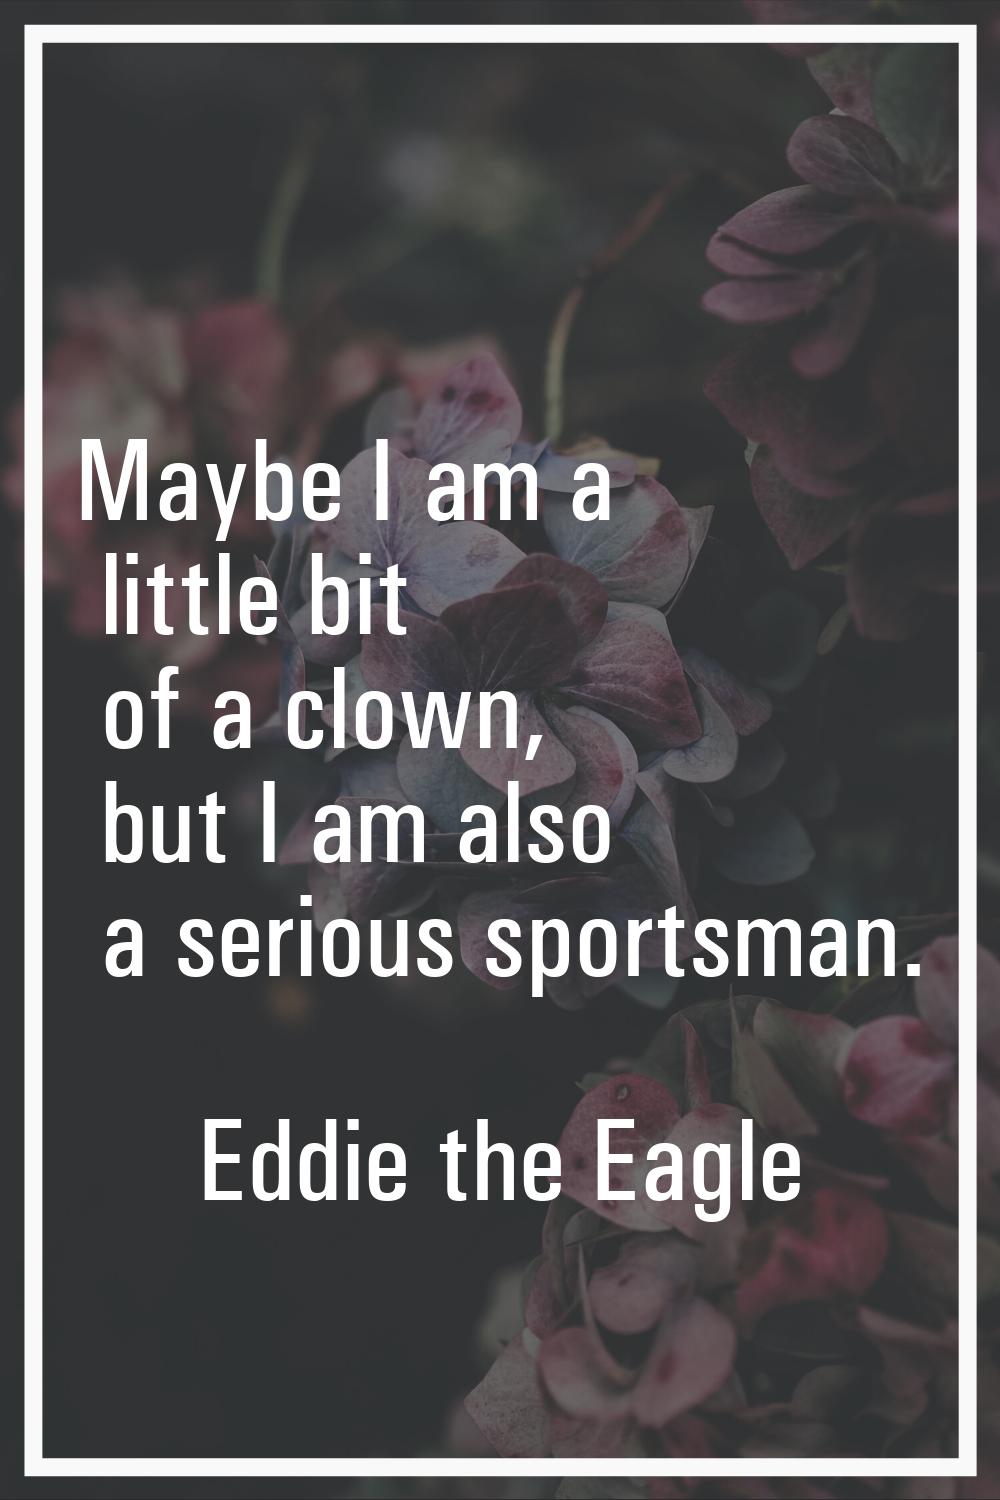 Maybe I am a little bit of a clown, but I am also a serious sportsman.